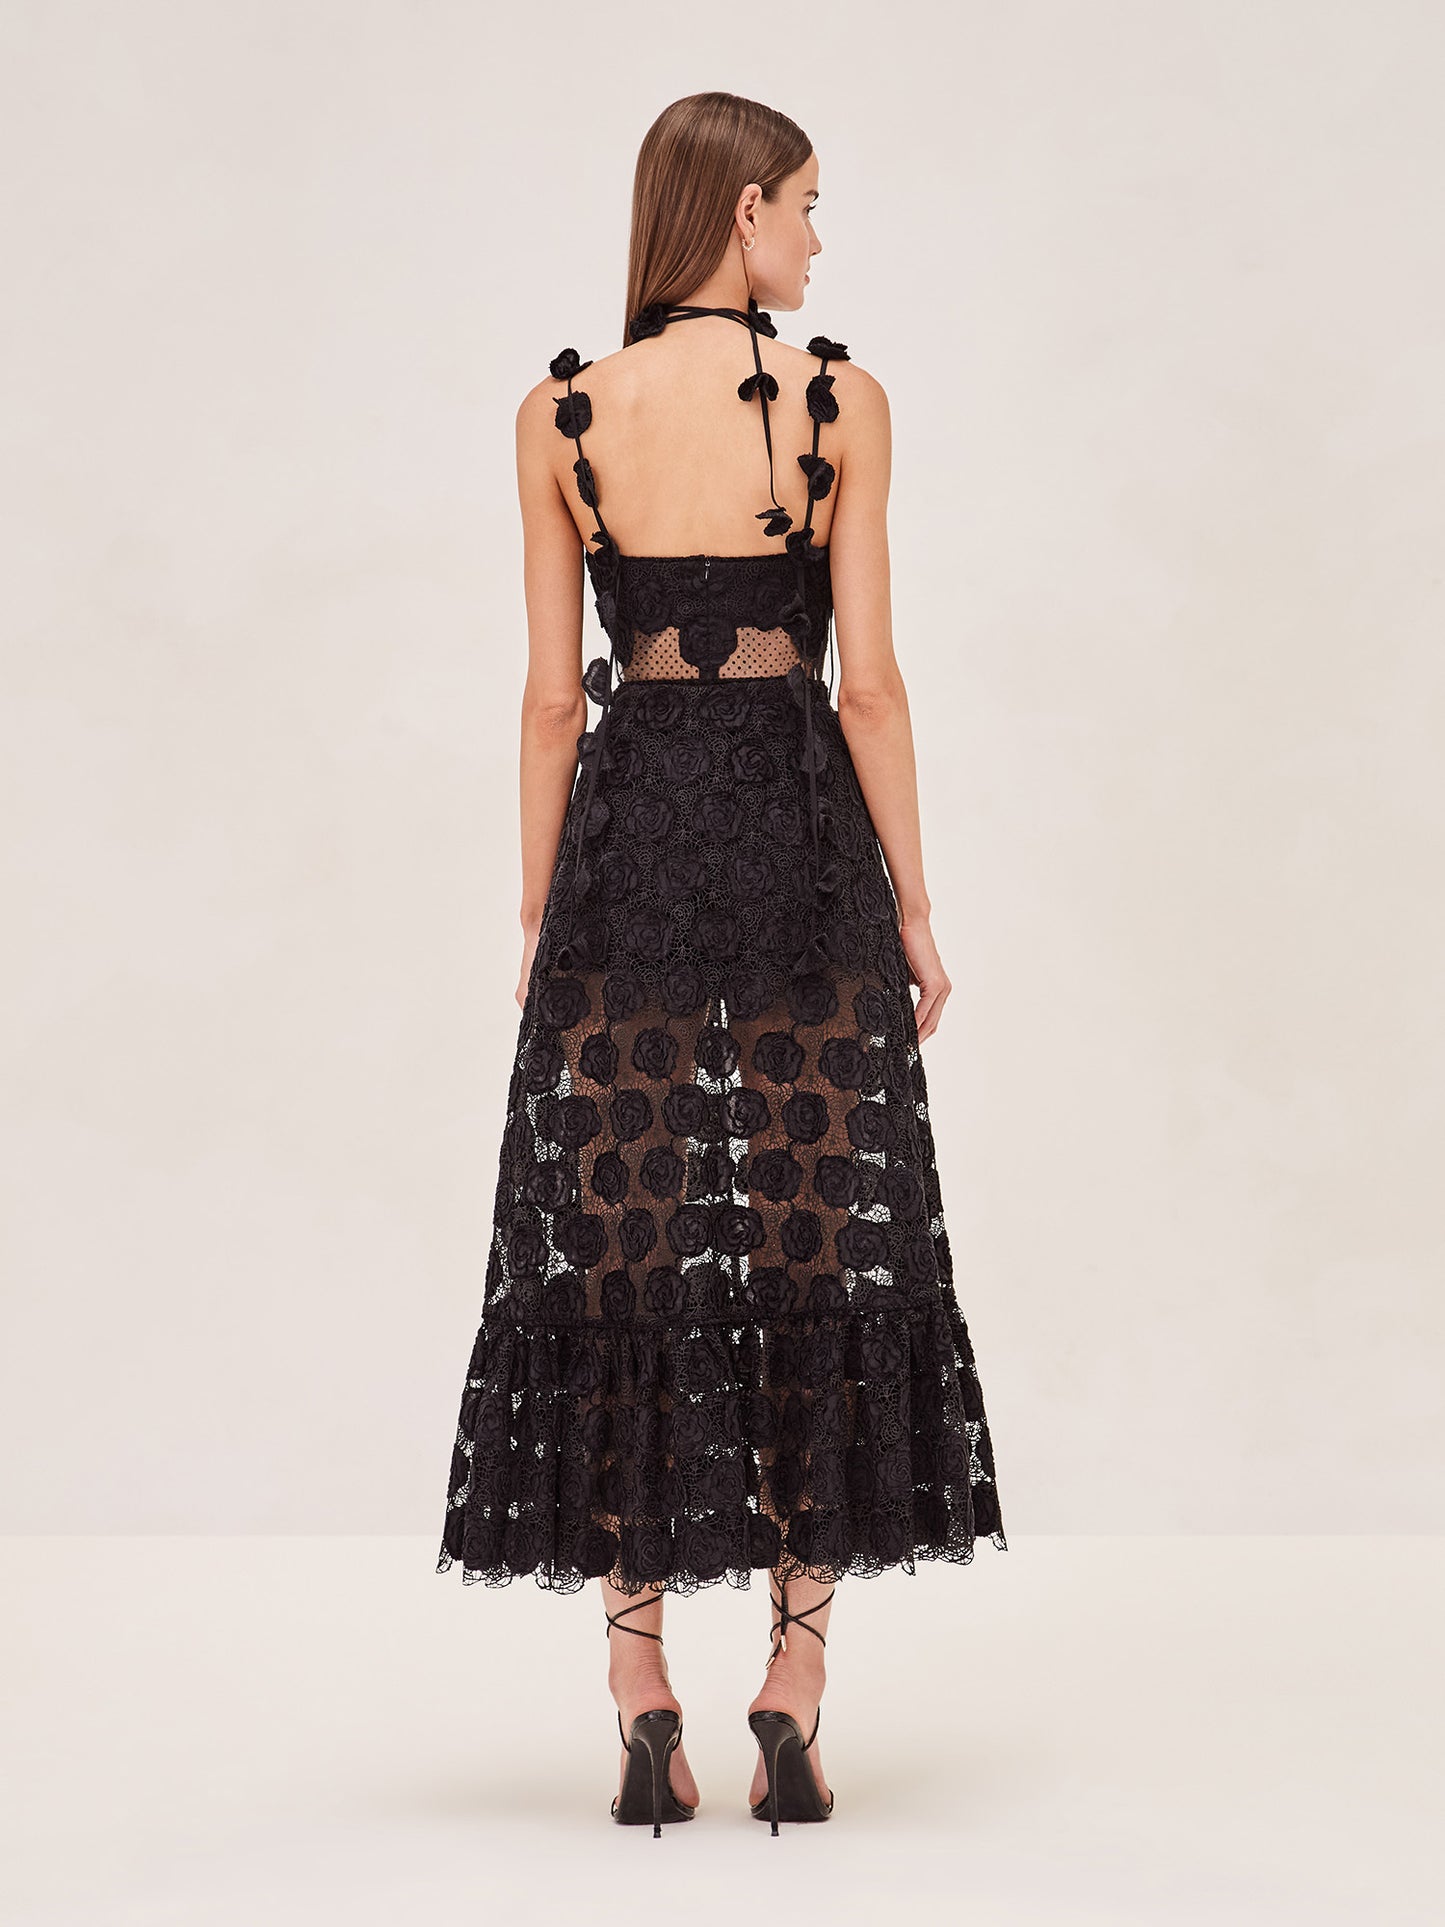 ALEXIS Armas romper in black lace with removeable skirt.back image